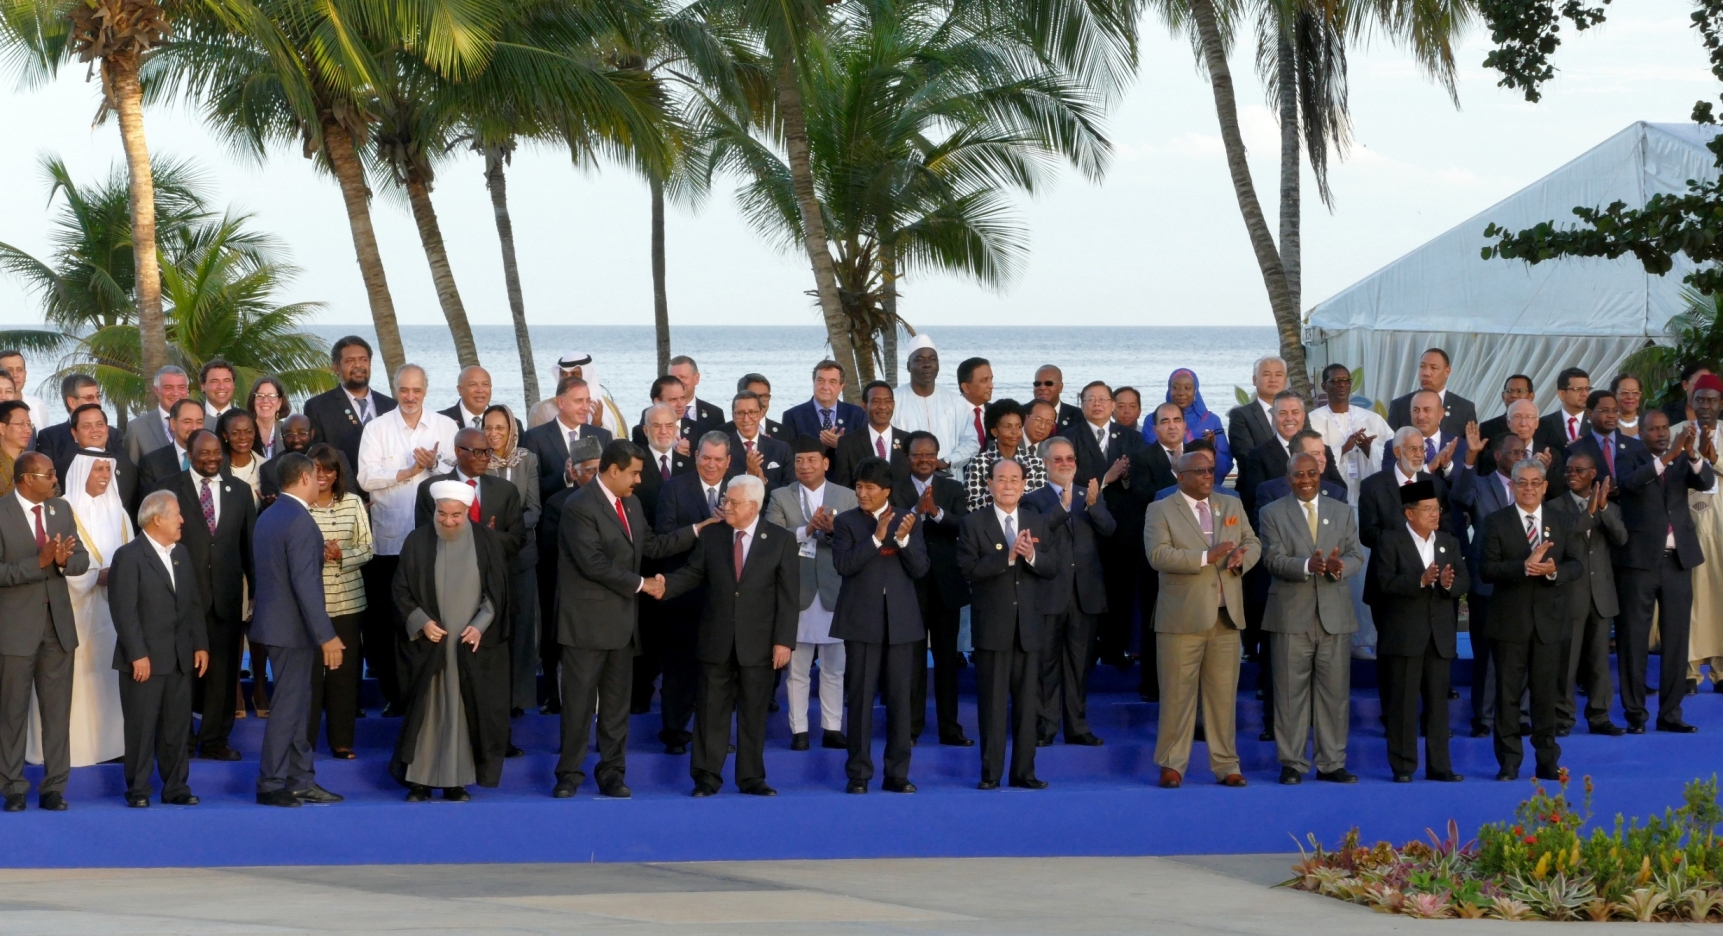 September 17th 2016 - Presidents of Delegations pose for the official photograph in the 17th Summit of the Non-Aligned Movement in Porlamar, Margarita Island, Venezuela